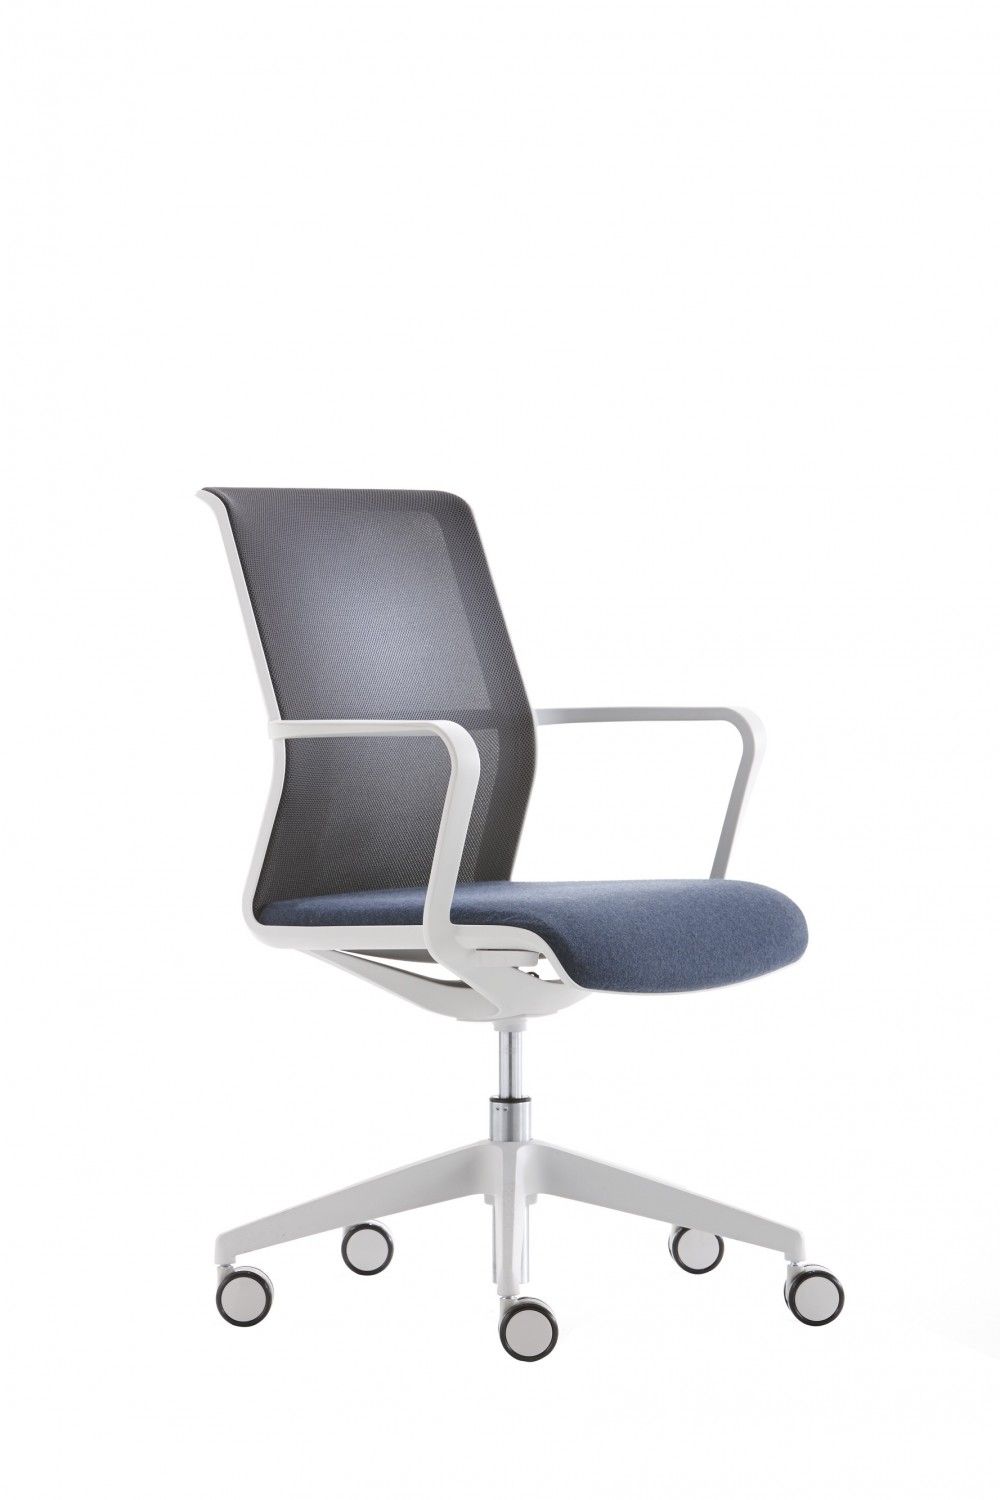 Designer Conference Chair